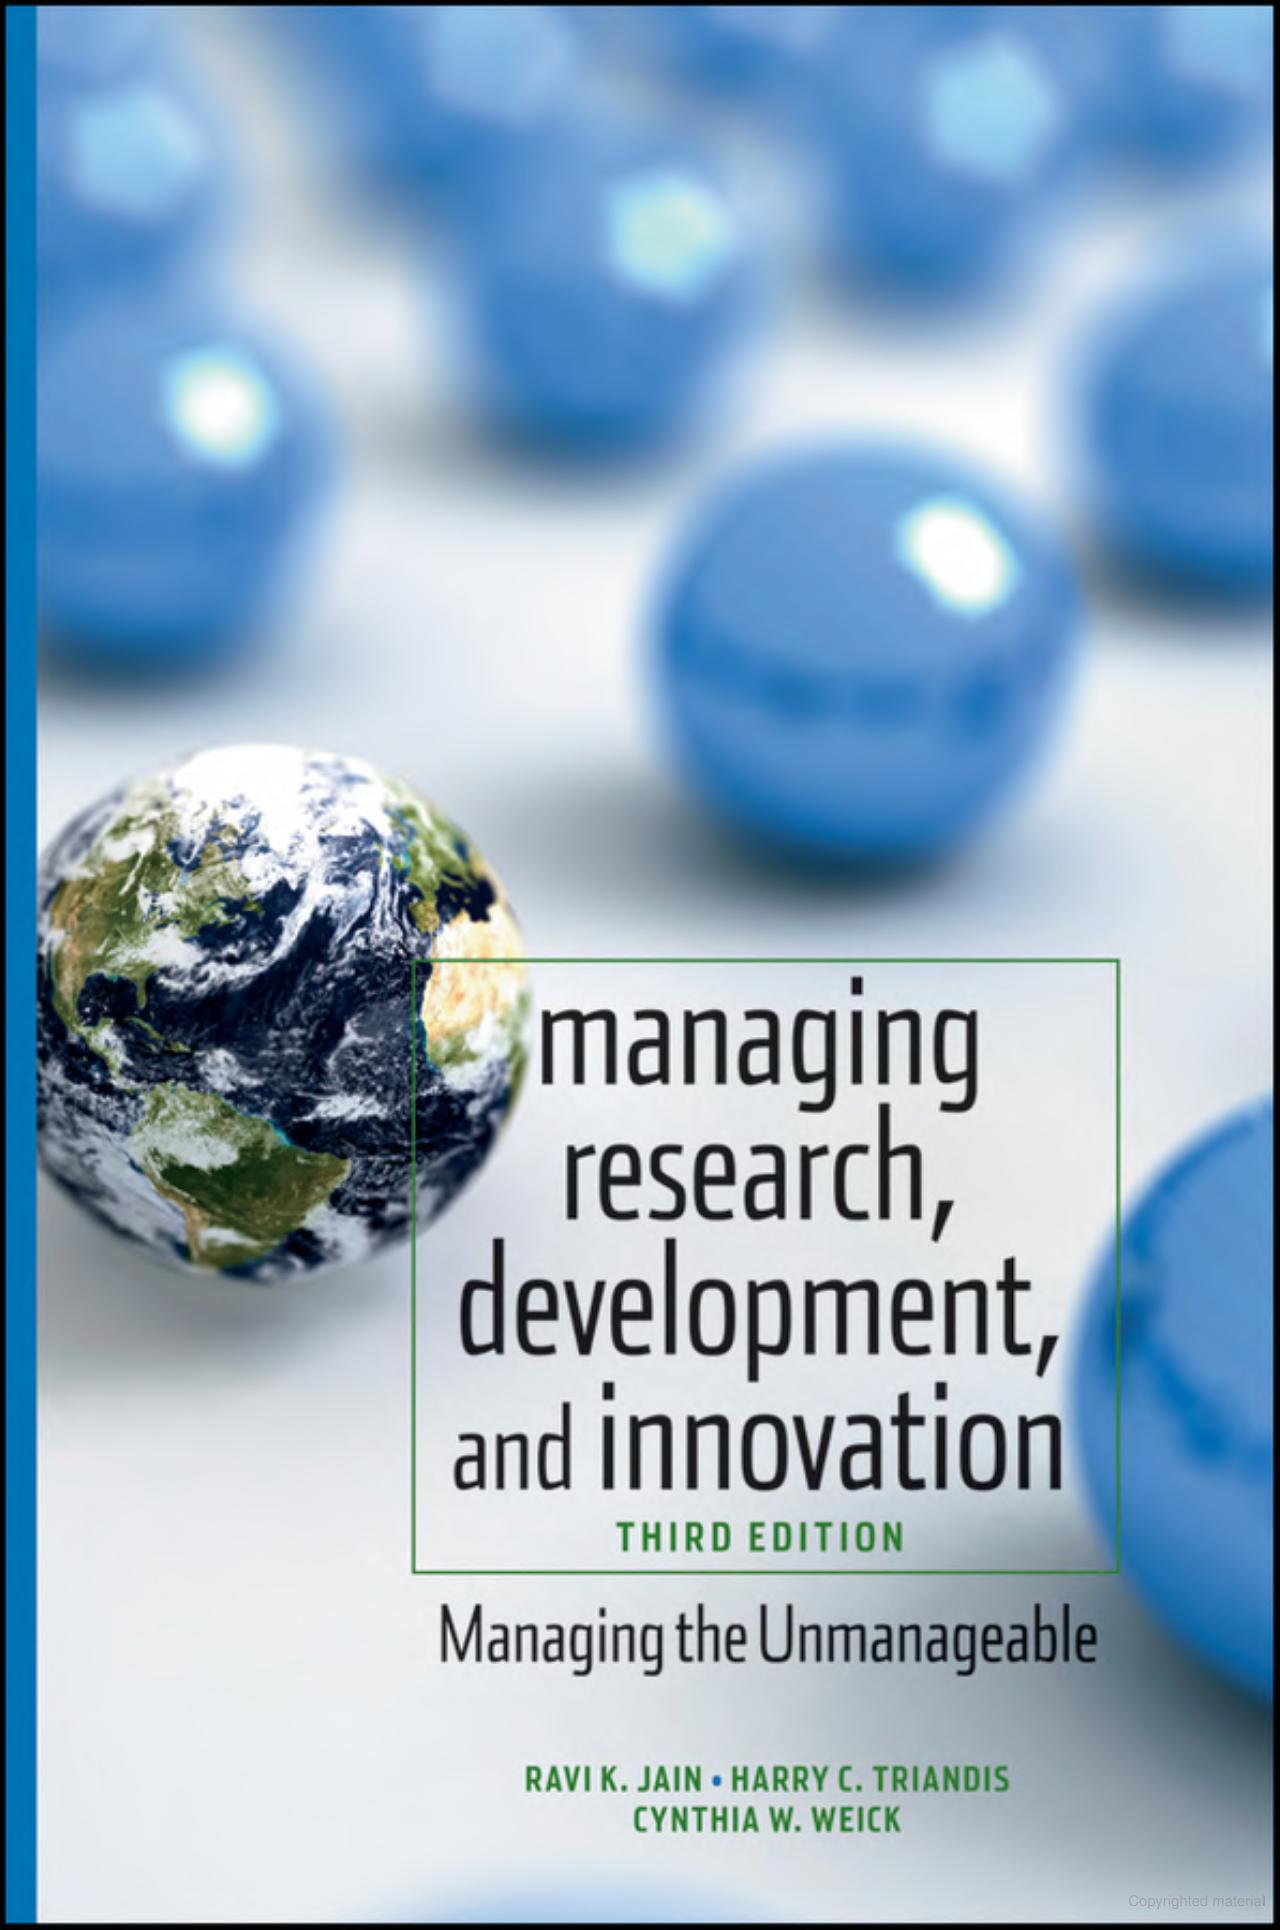 Managing research, development and innovation managing the unmanageable